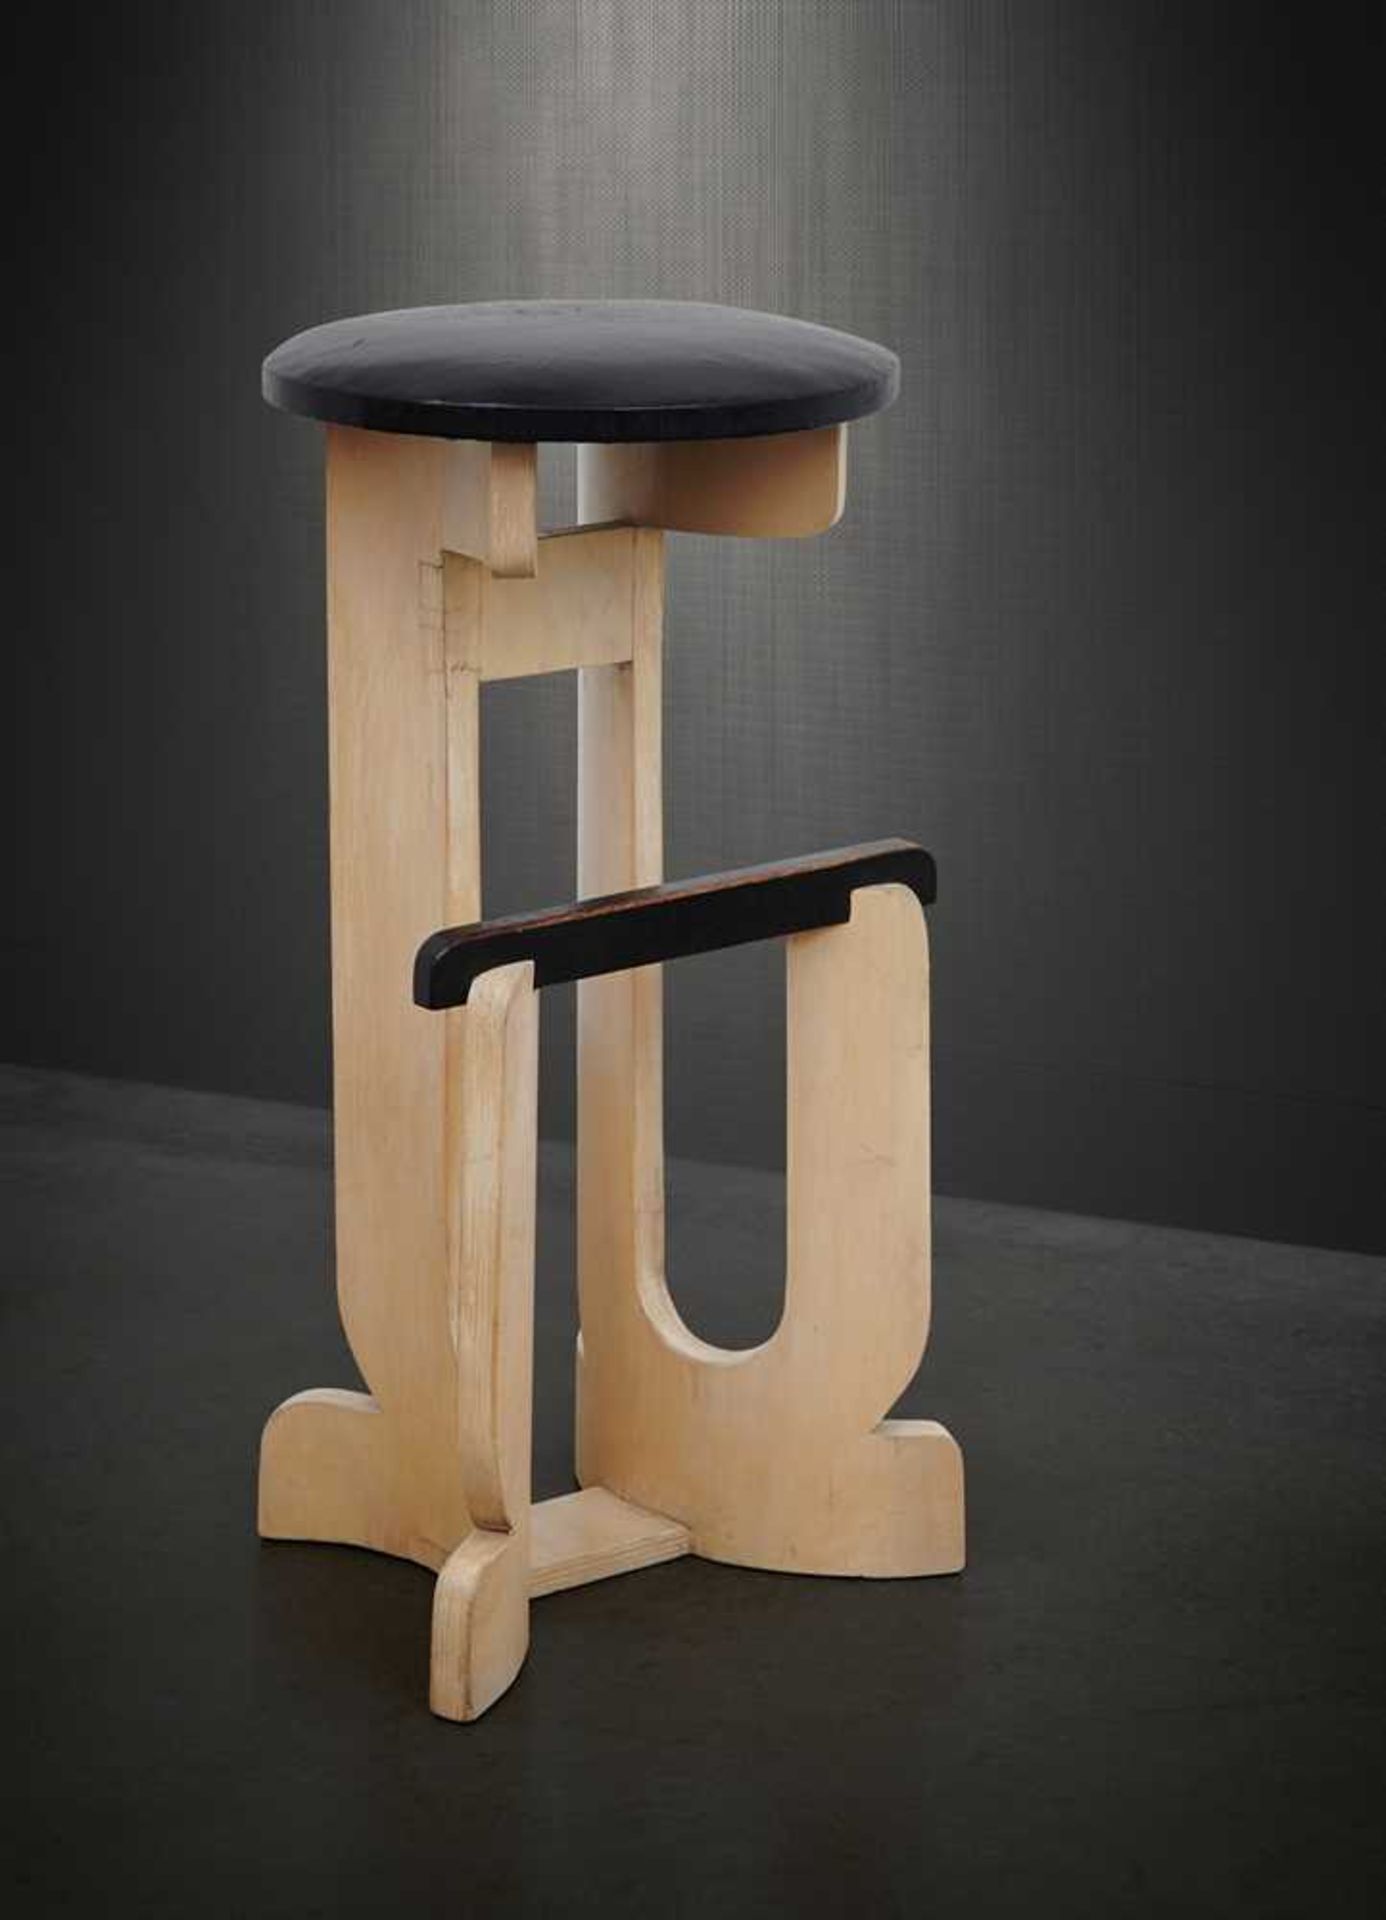 Gerald Summers (British 1899-1967) for Makers of Simple Furniture COCKTAIL STOOL, 1930s - Image 2 of 4